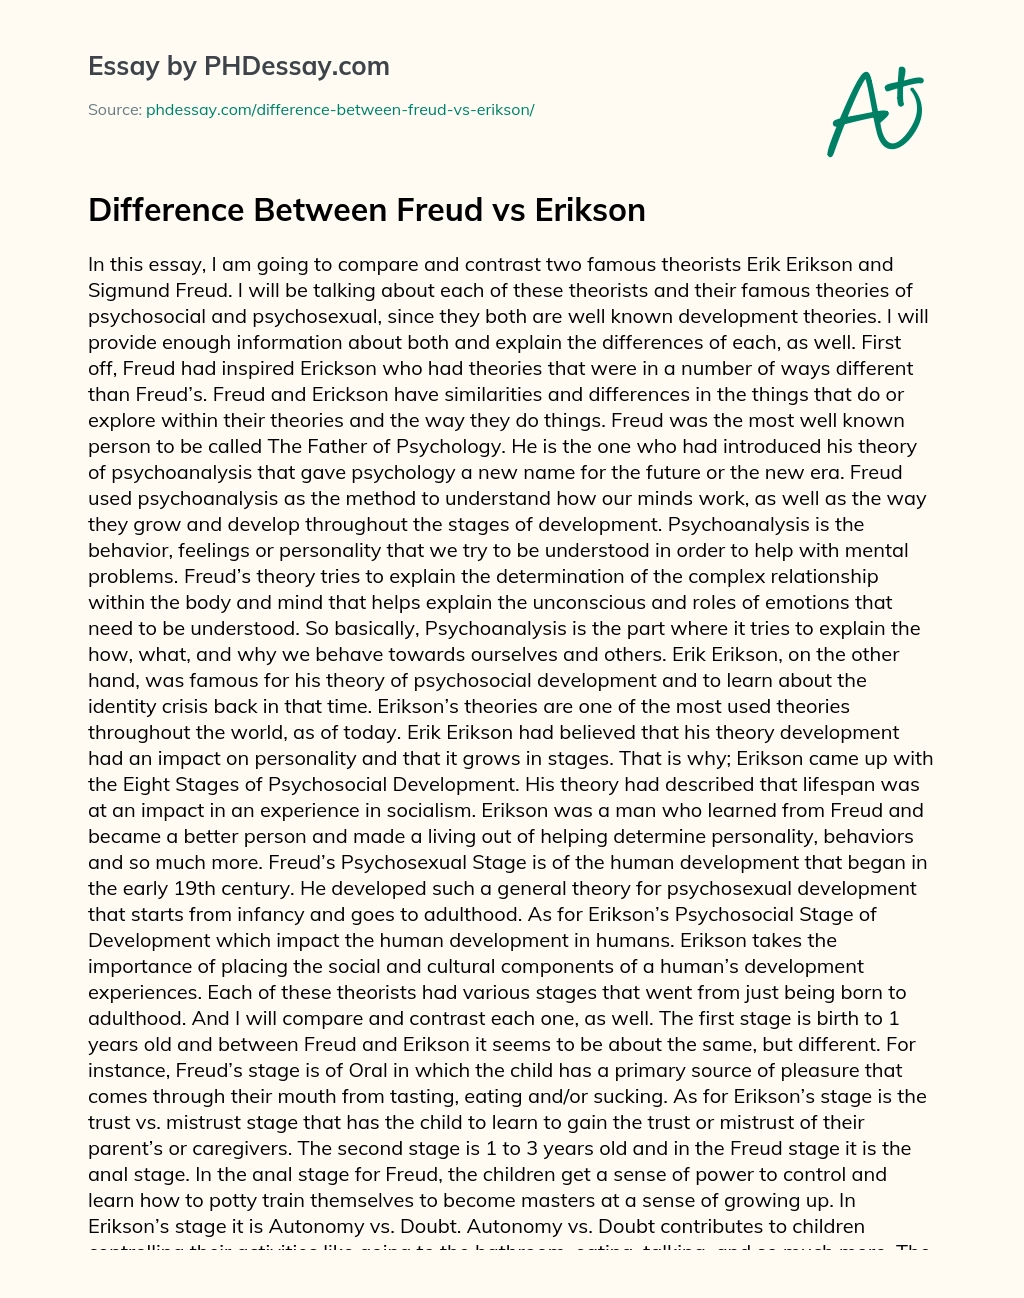 difference between freud and erikson